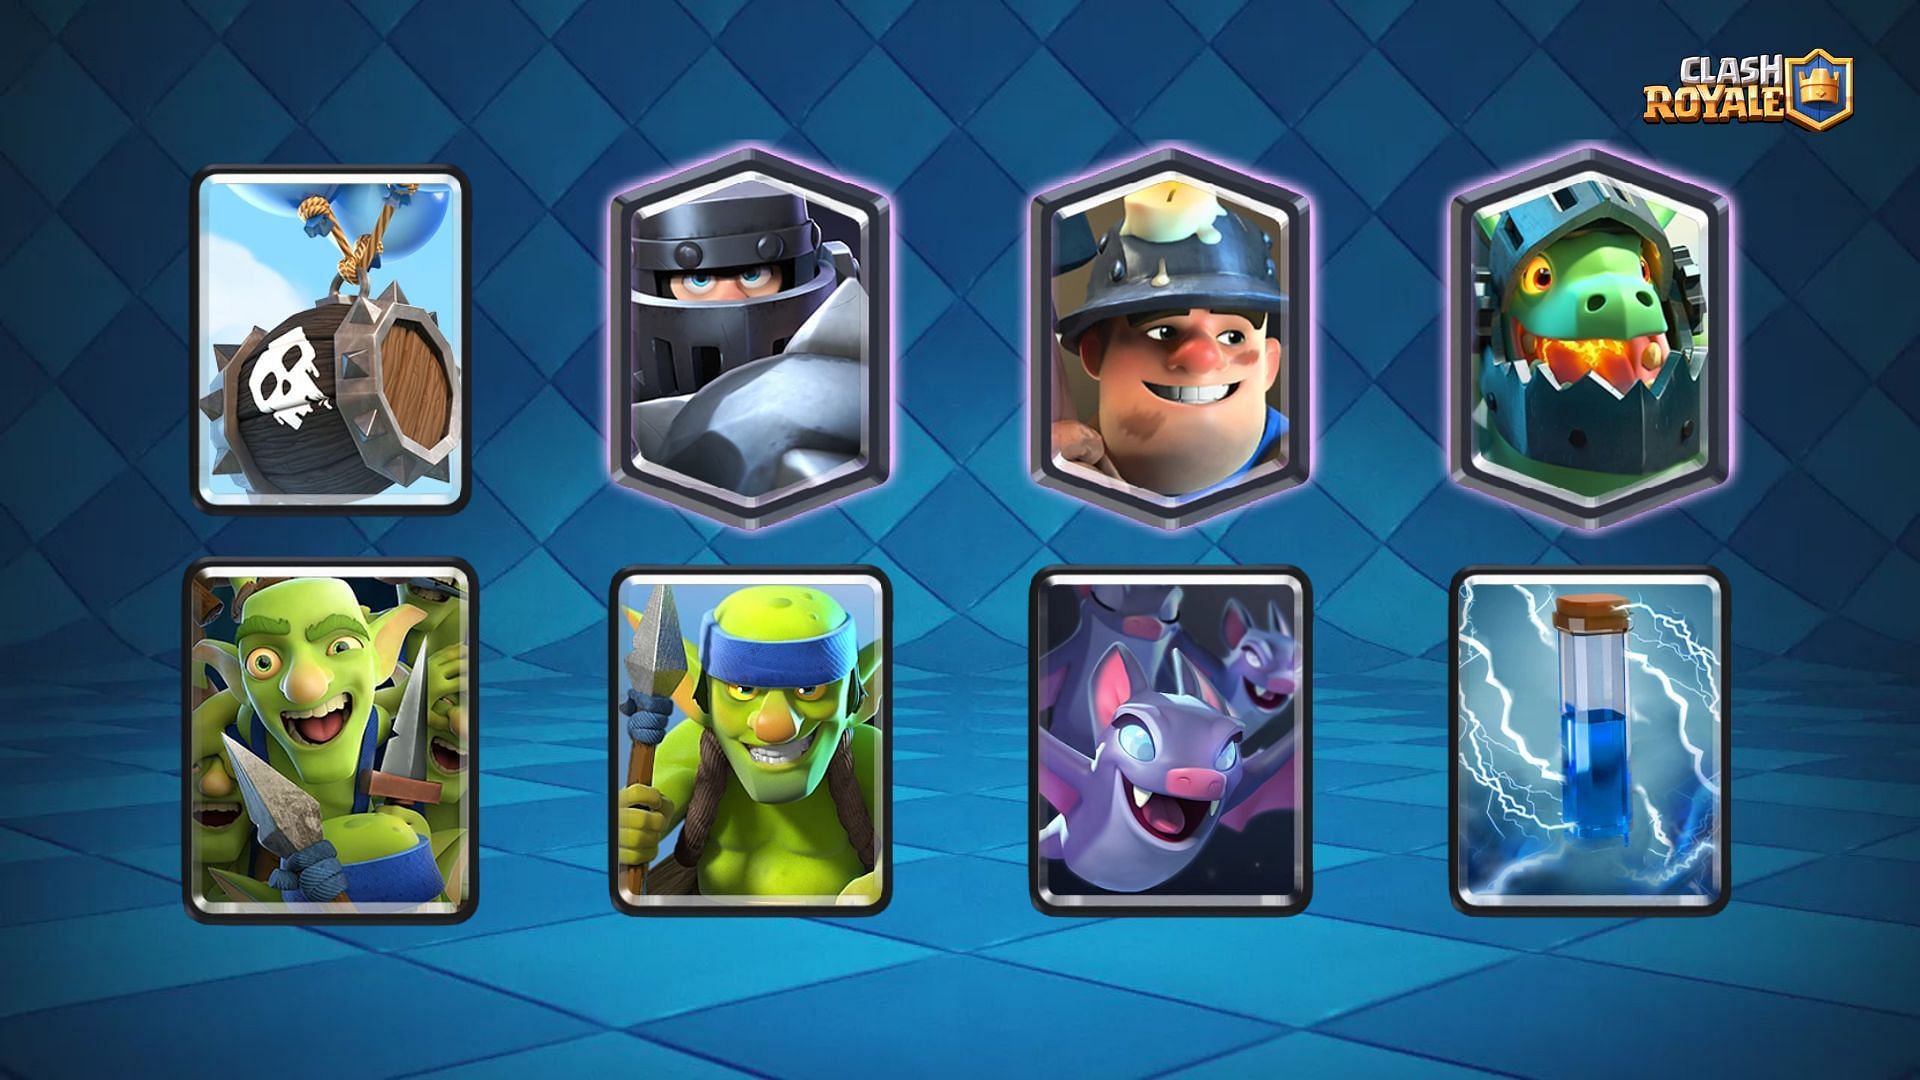 Knightly dominion deck (Image via Supercell)